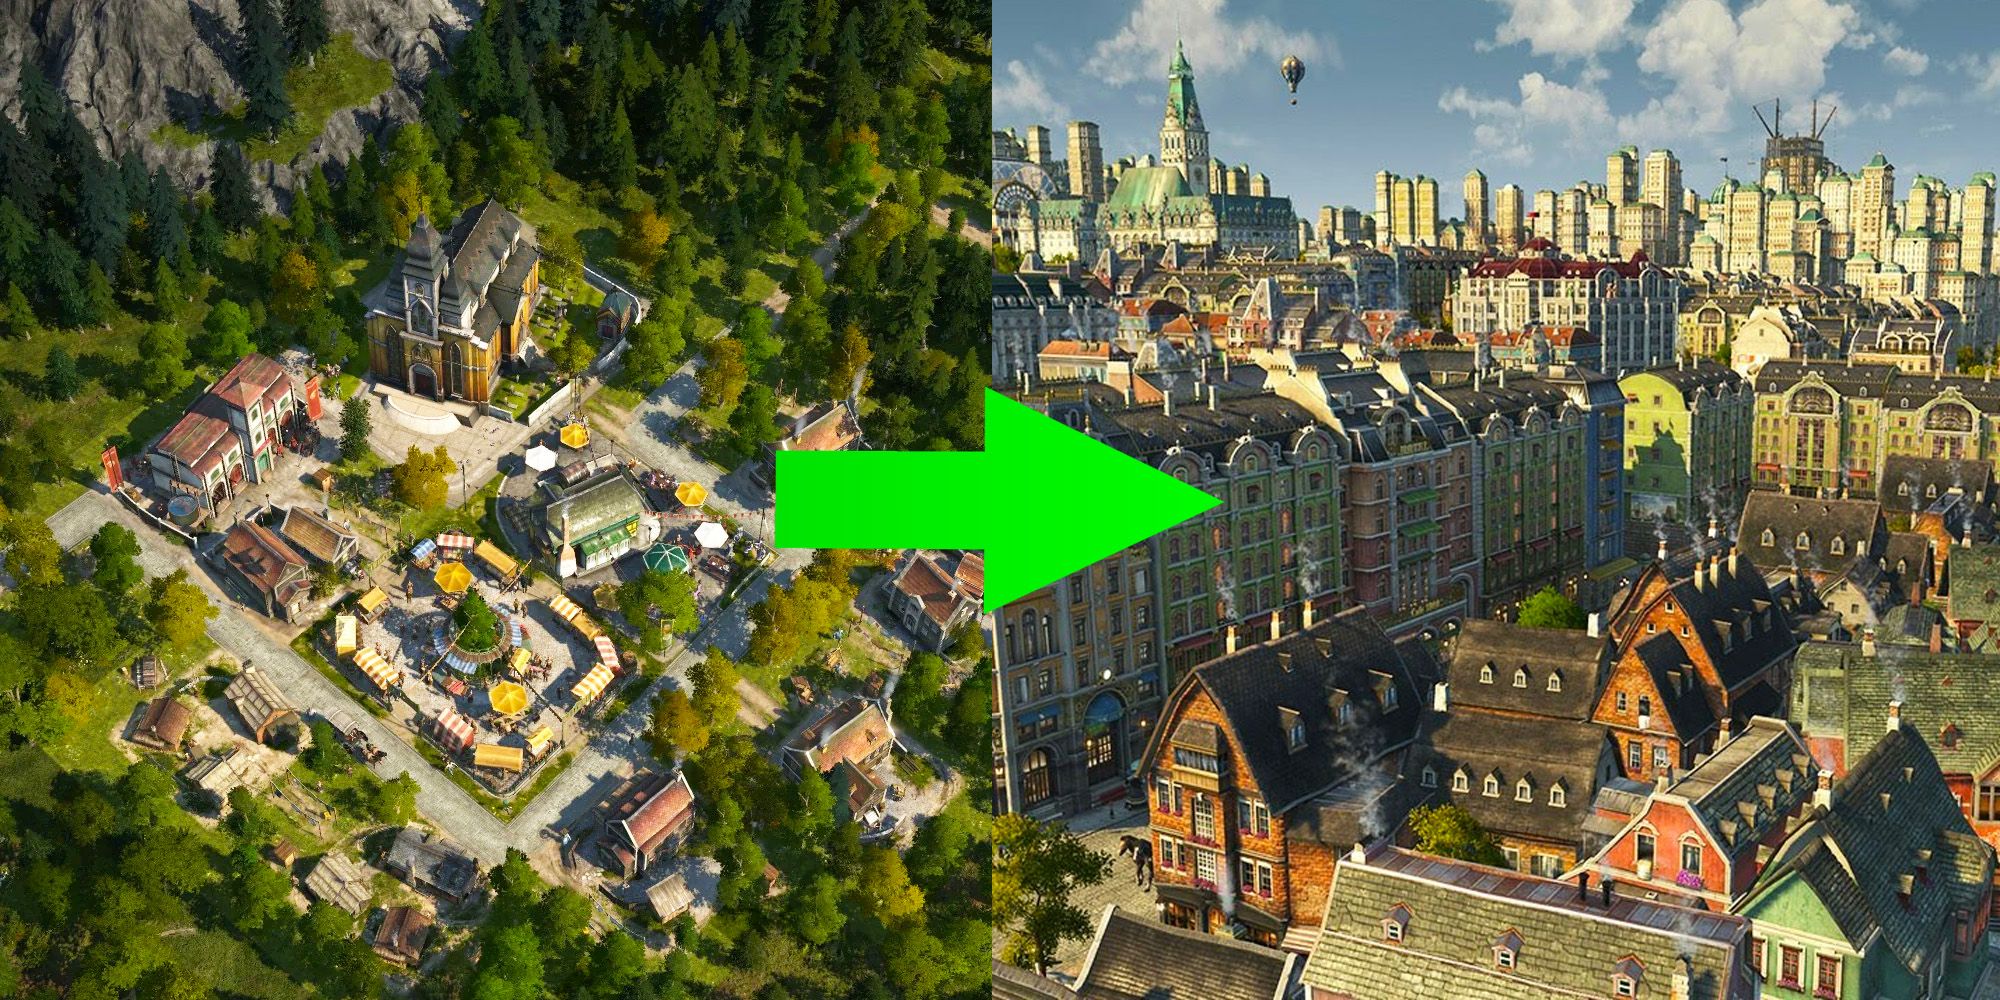 A split image of a small town and a city in Anno 1800